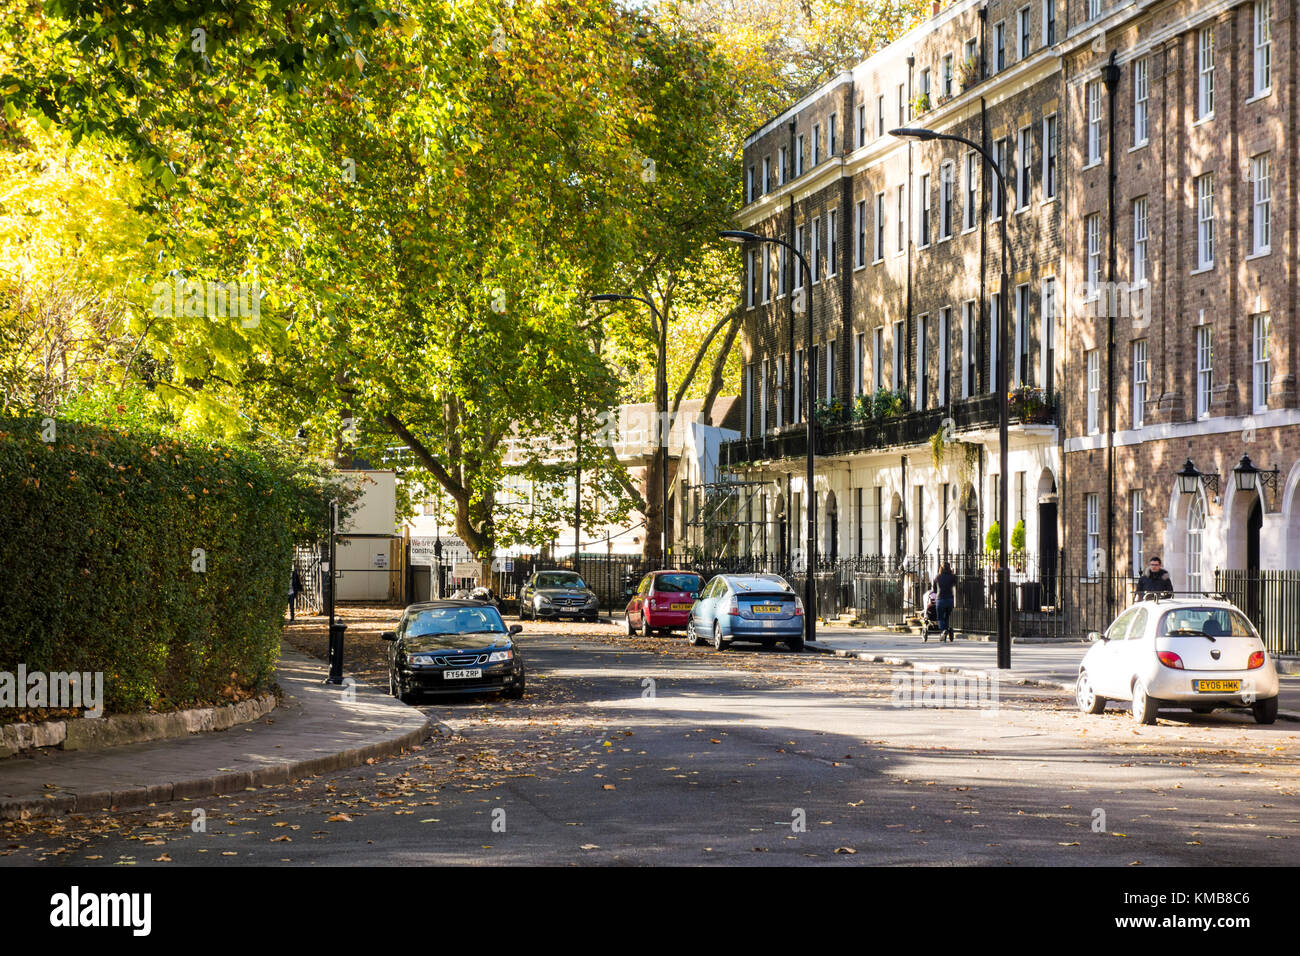 Early autum / fall / autumnal scene in Mecklenburgh Square with green trees and fallen leaves. Terraced houses designed by Joseph Kay. Bloomsbury, Lon Stock Photo